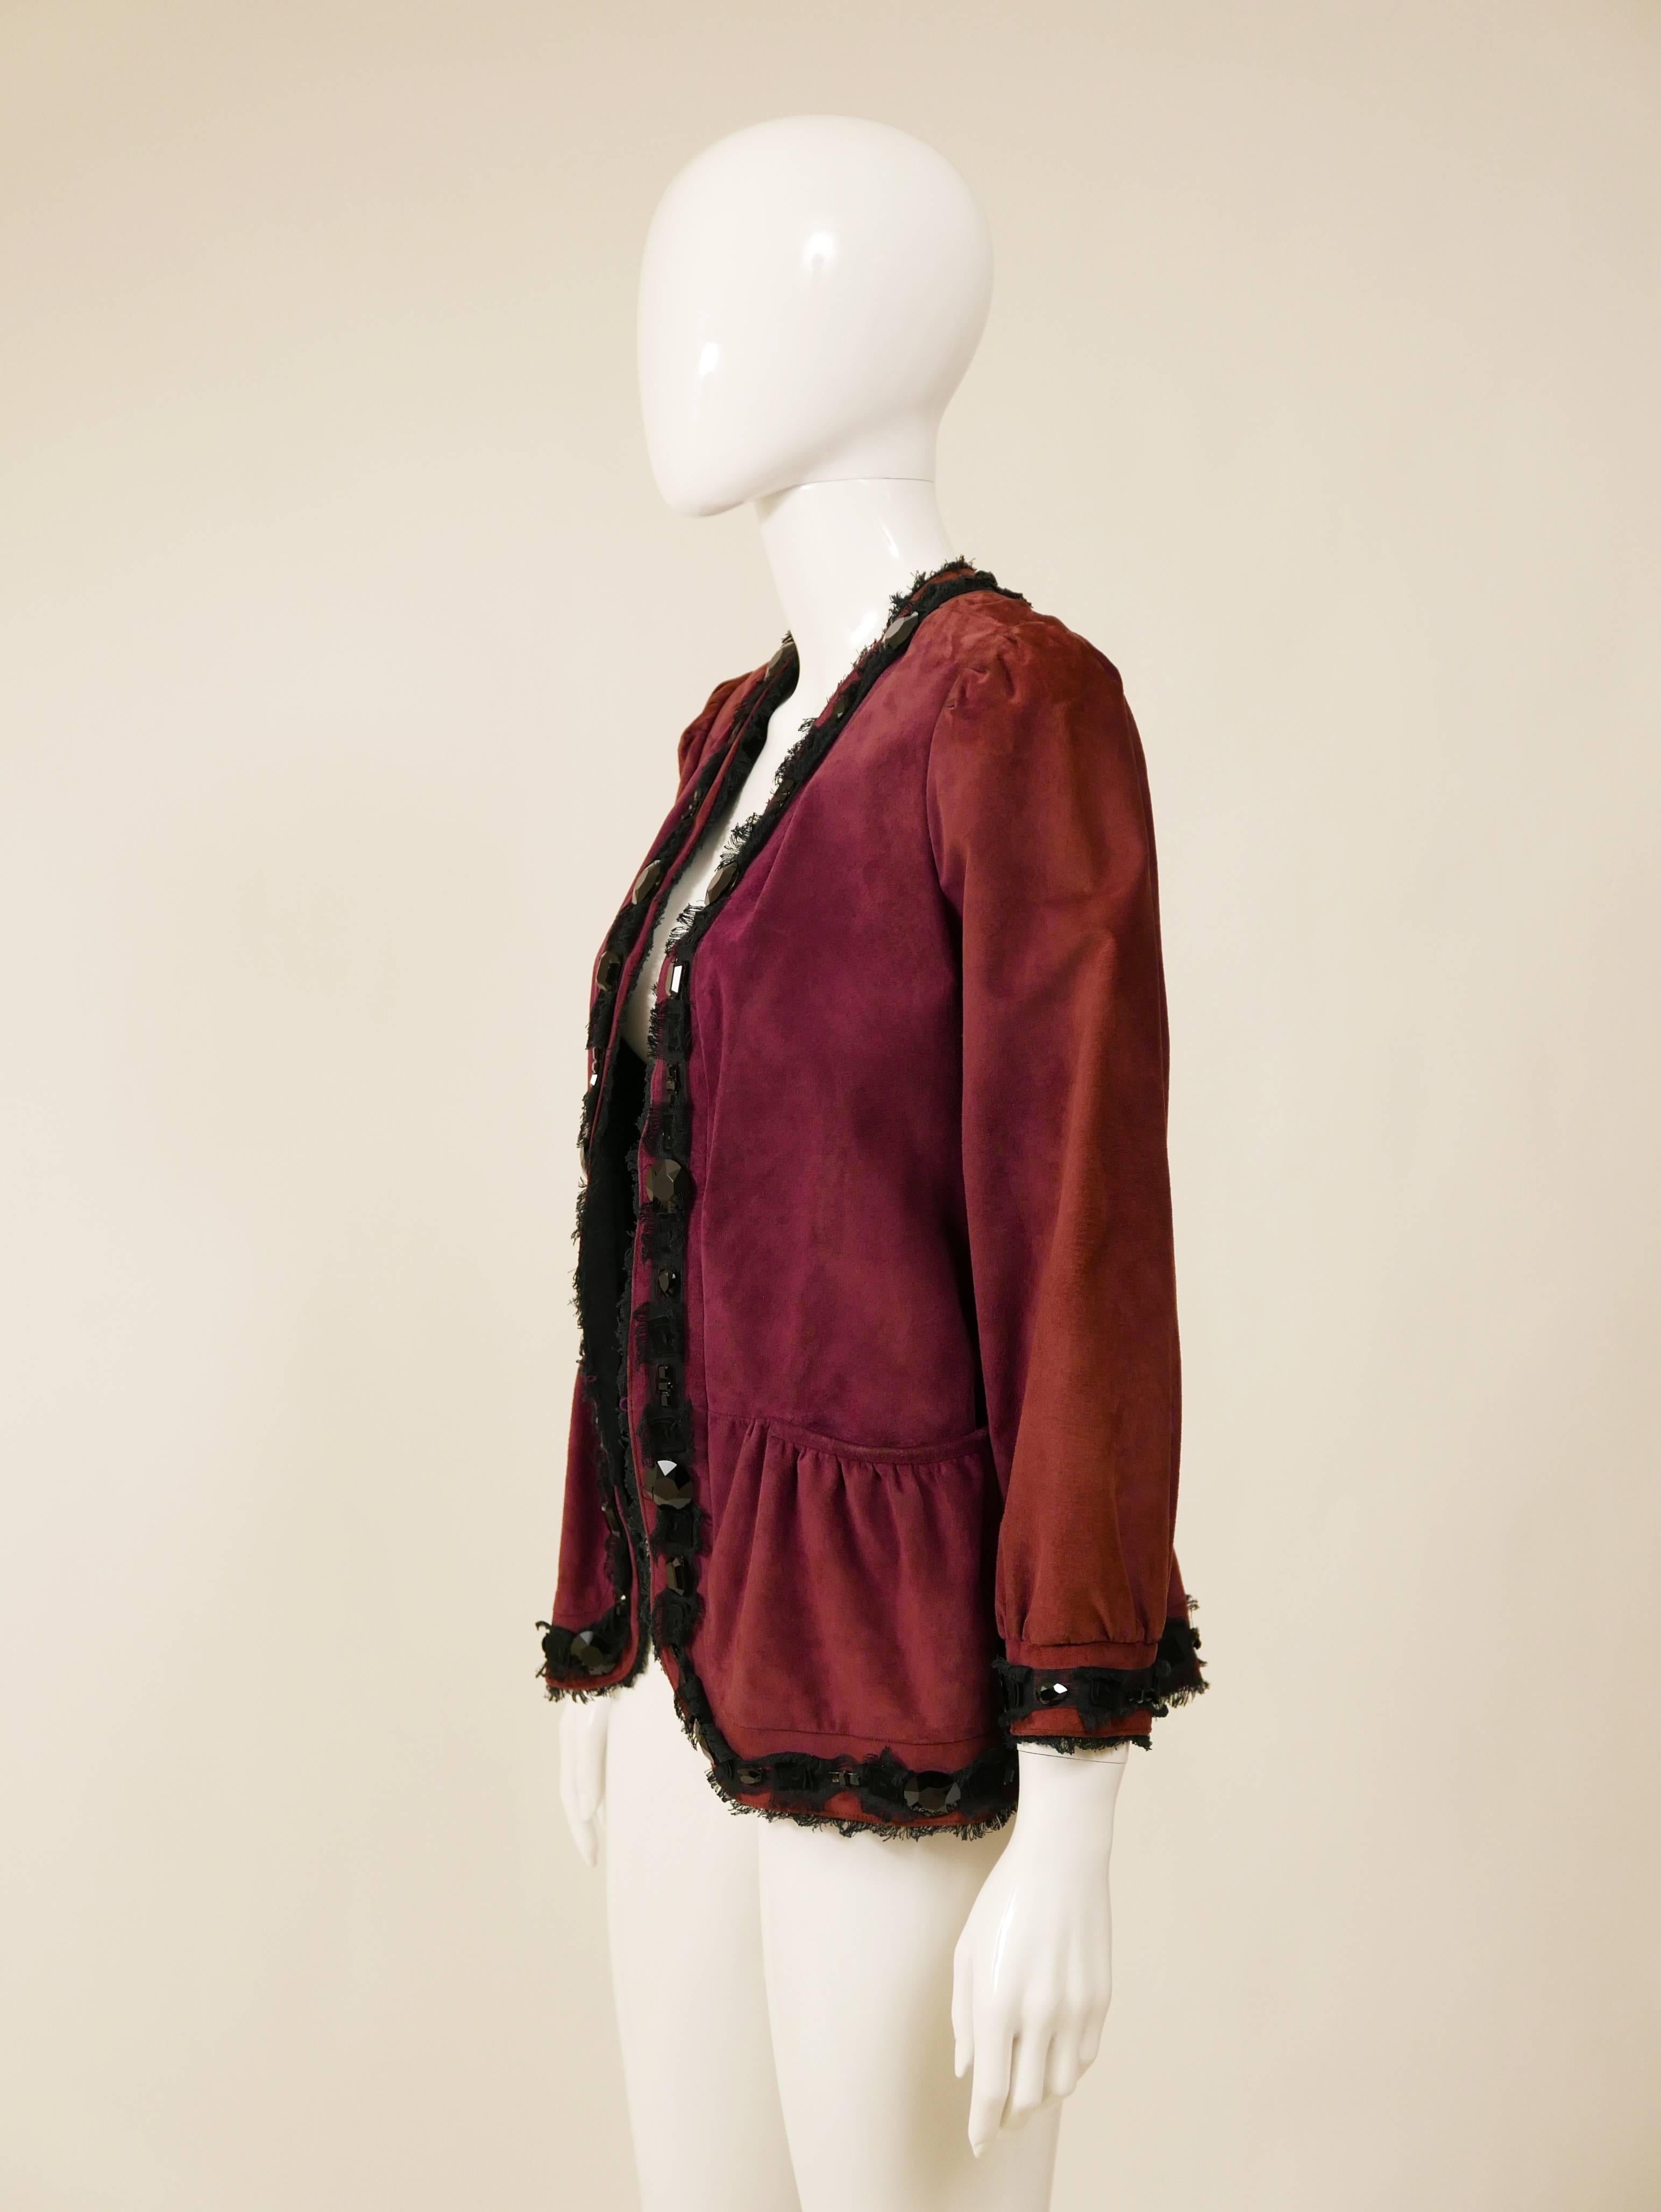 This lovely Yves Saint Laurent jacket is in a maroon suede soft leather with black trimming and large beads details. It has puffed sleeves and frontal pockets. It's fully black lined.

Good condition 

Label: Yves Saint Laurent Rive Gauche - Made in